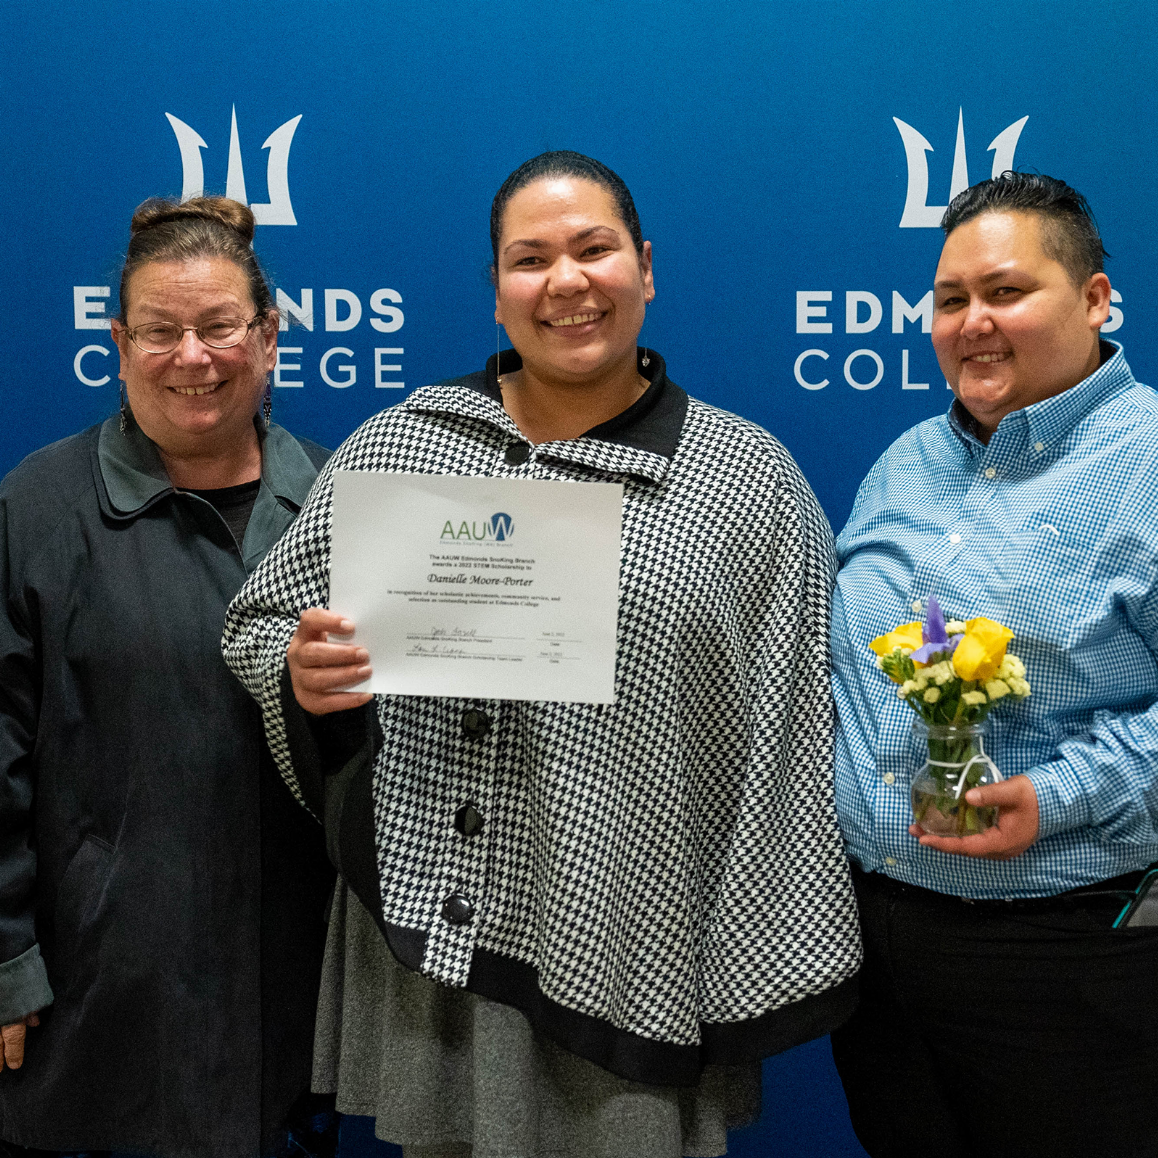 Edmonds College student Danielle Porter-Moore was one of six scholarship recipients honored during the 2022 AAUW STEM Scholarship Awards.